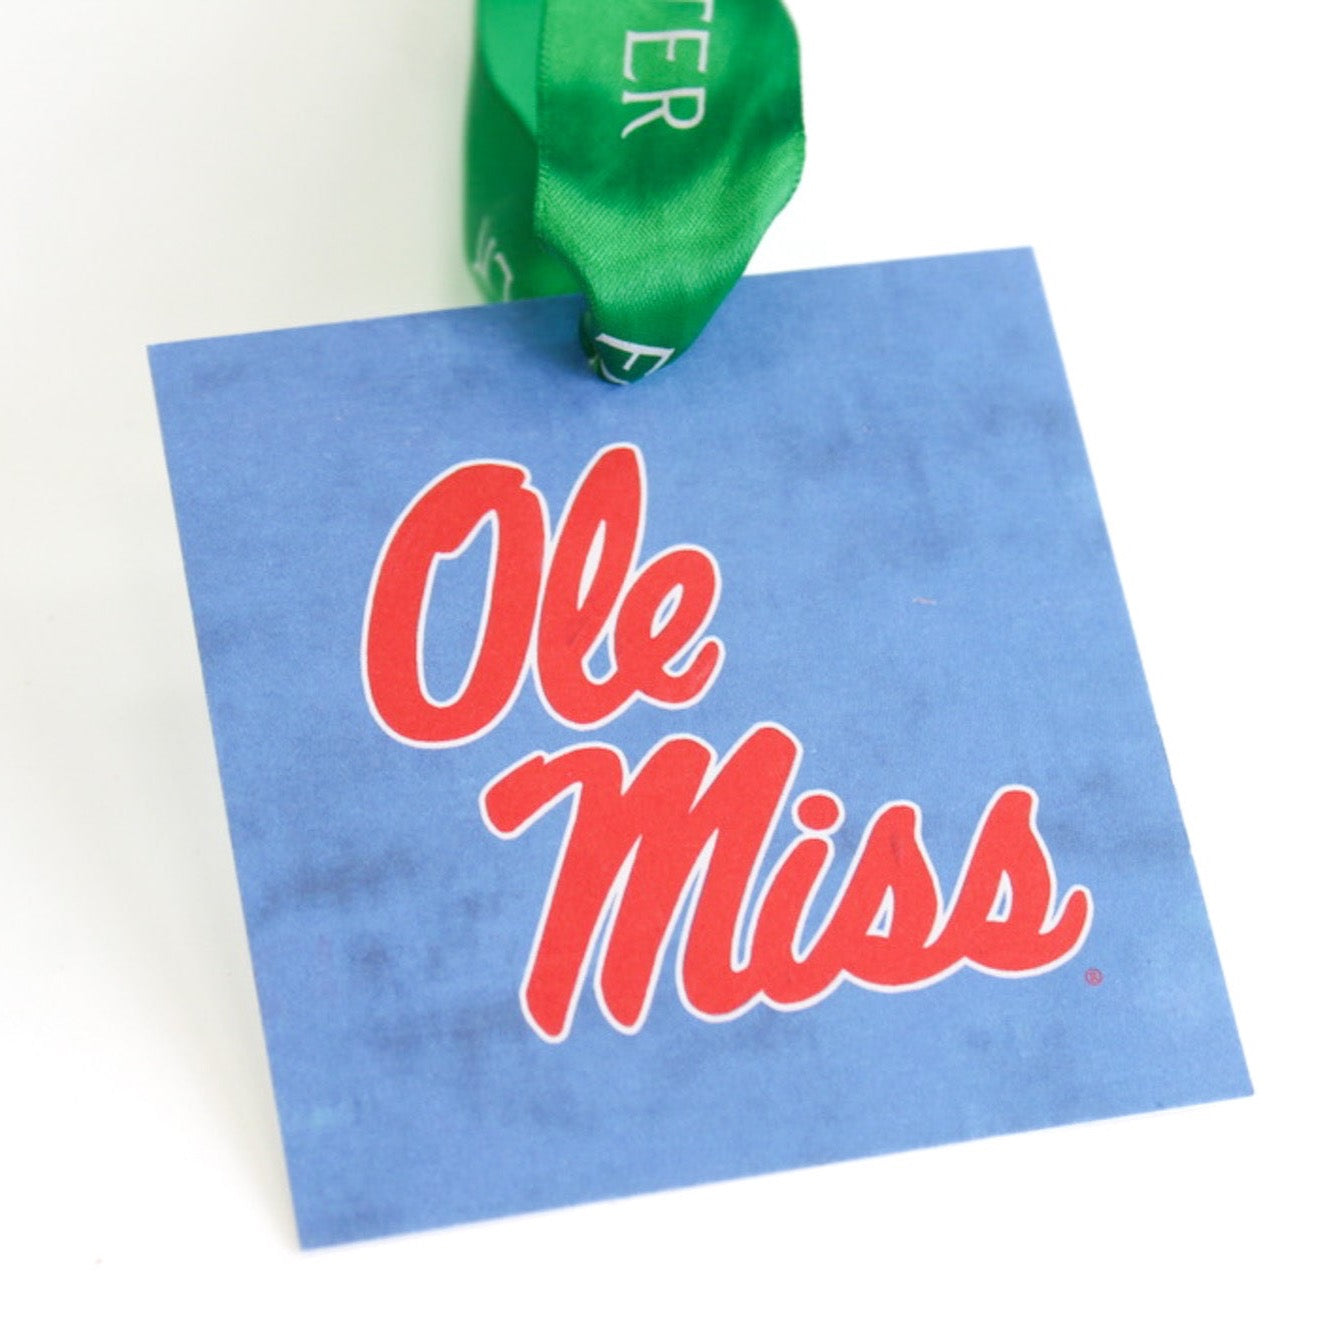 Ole Miss logo gift tag